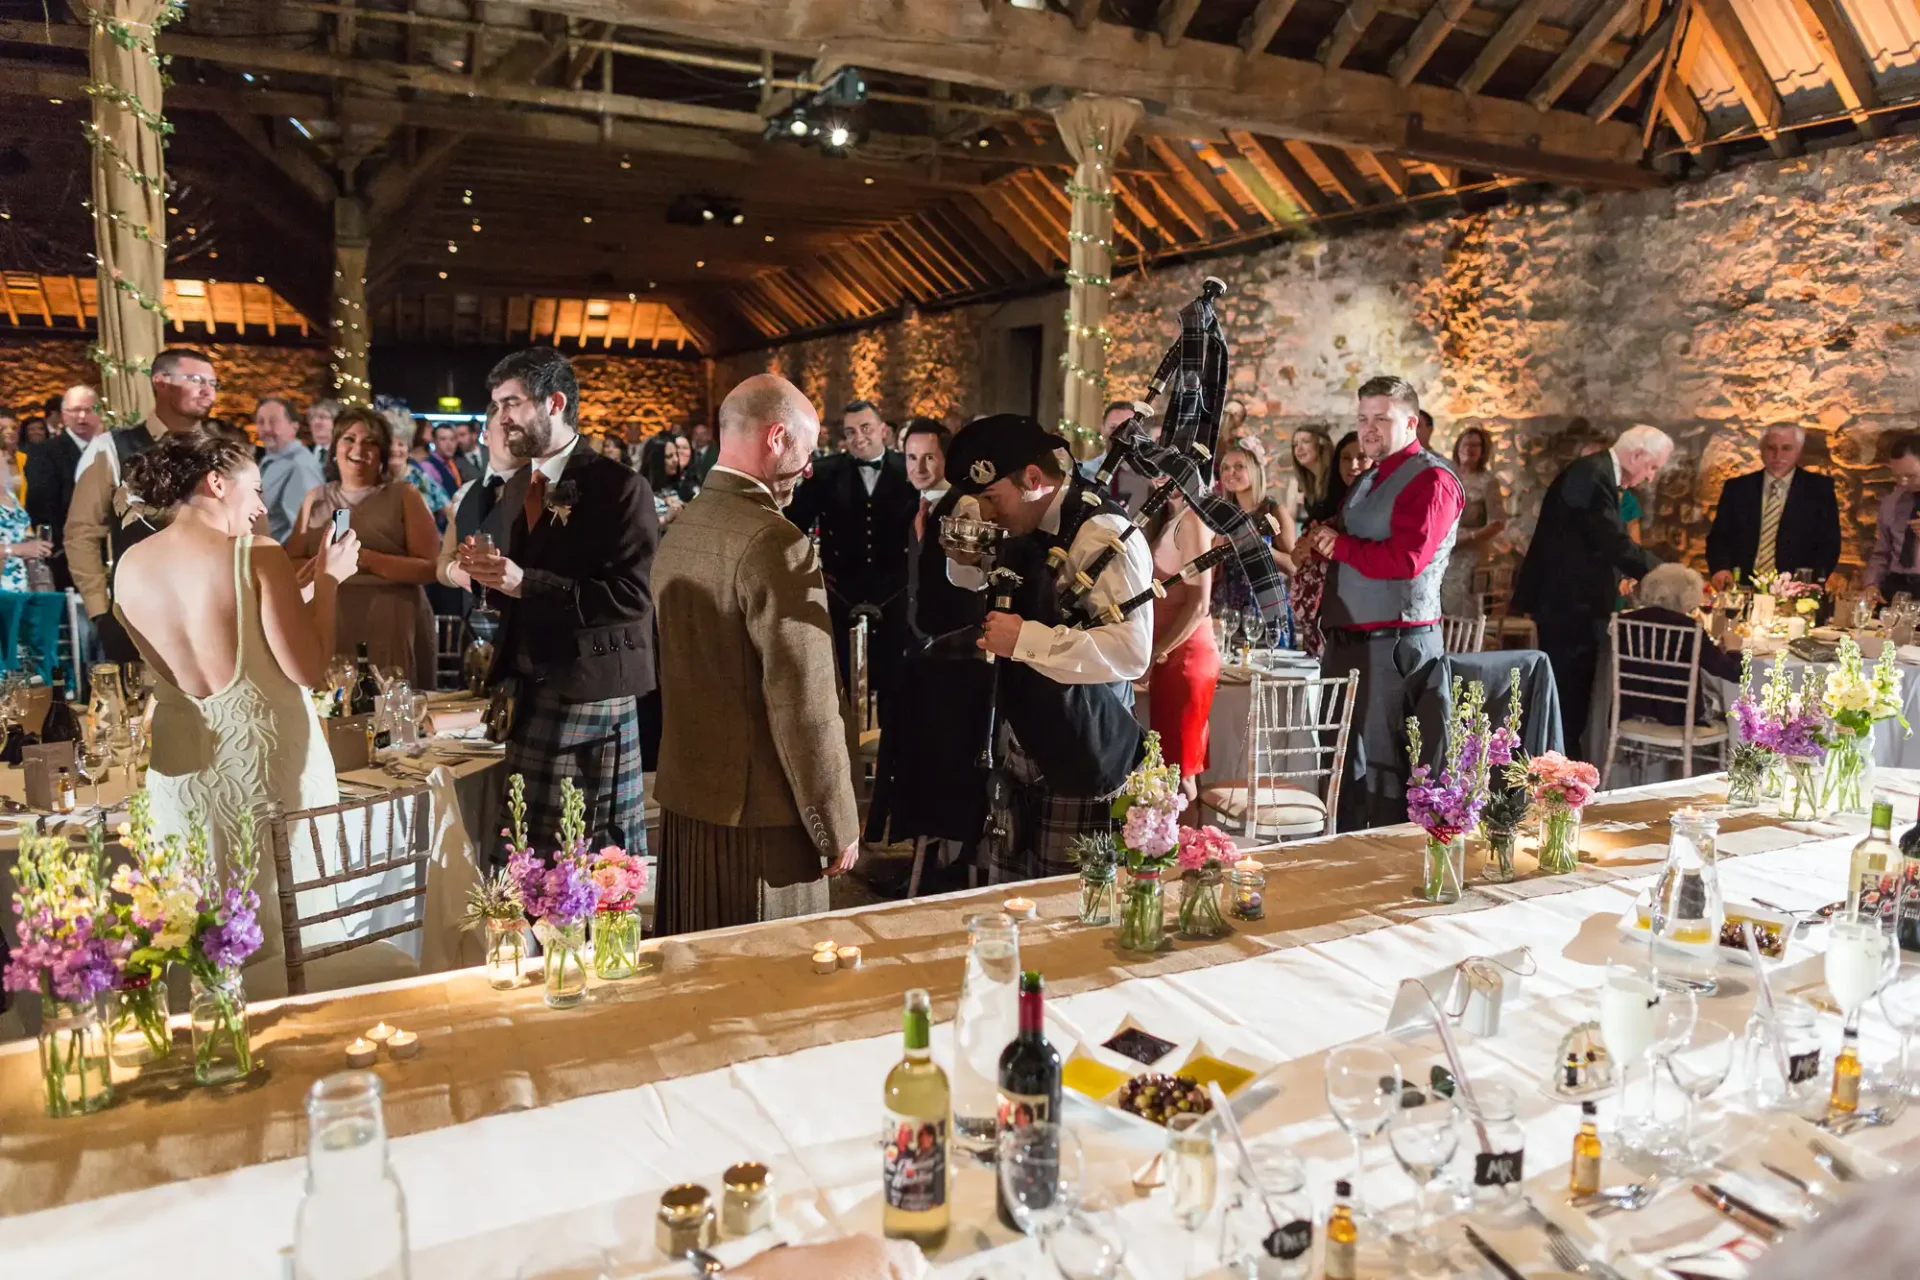 A lively wedding reception inside a rustic hall, with guests clapping for a bagpiper walking past decorated tables.